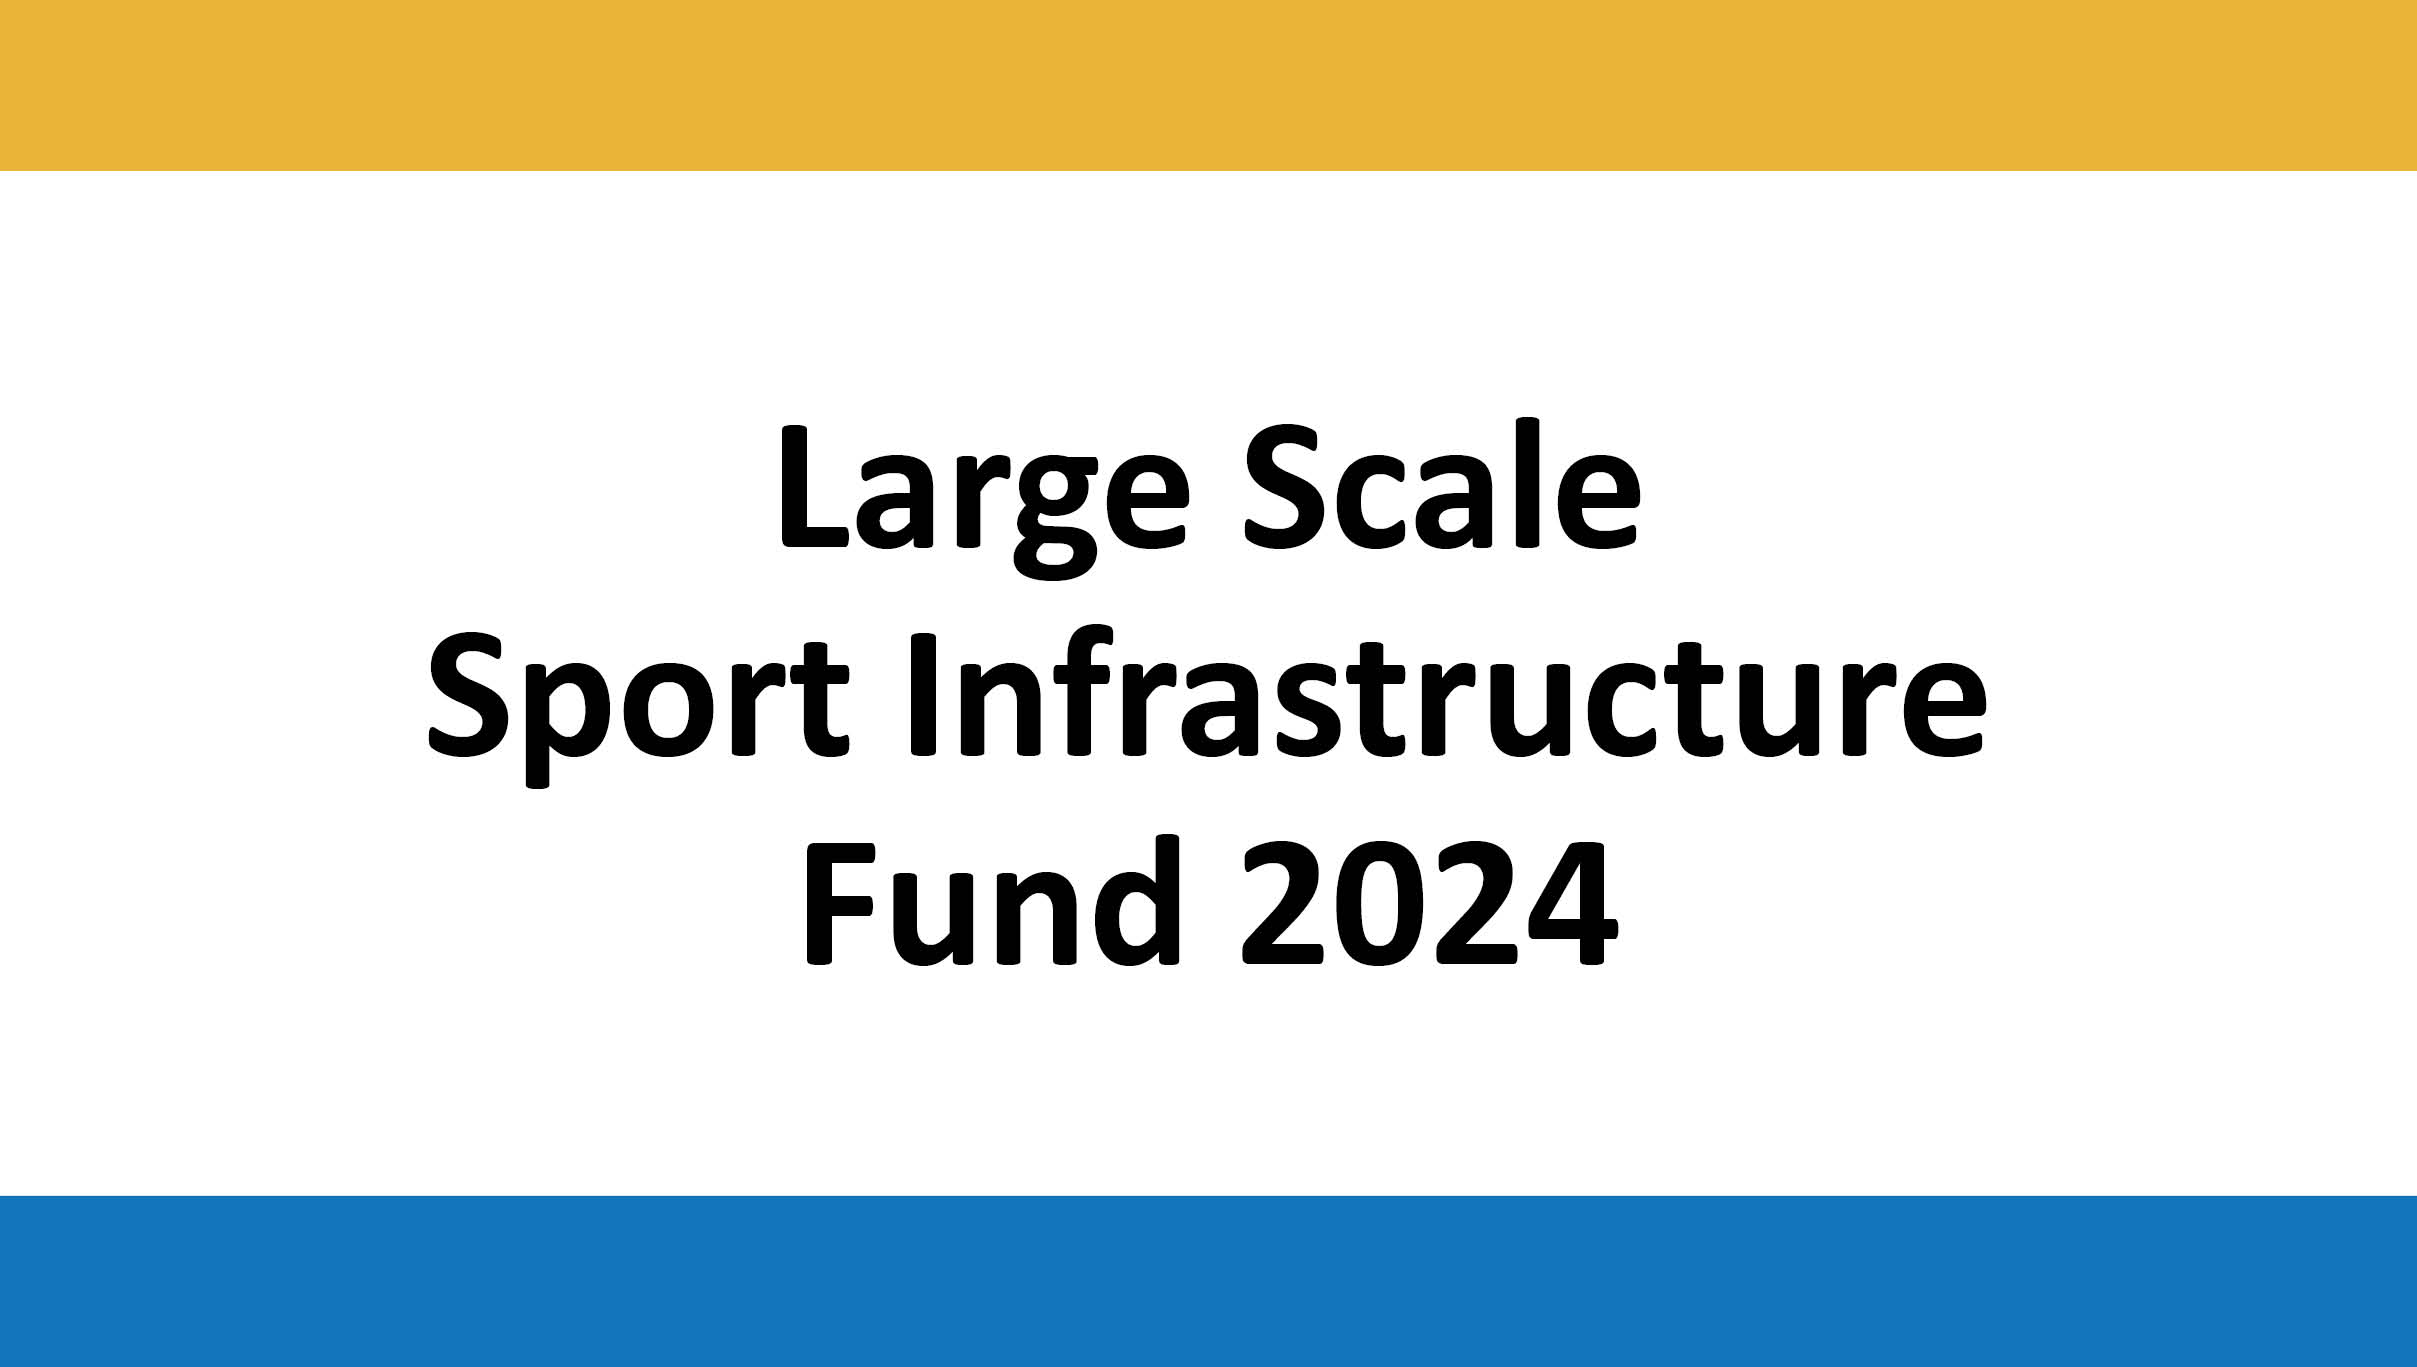 Large Scale Sport Infrastructure Fund 2024